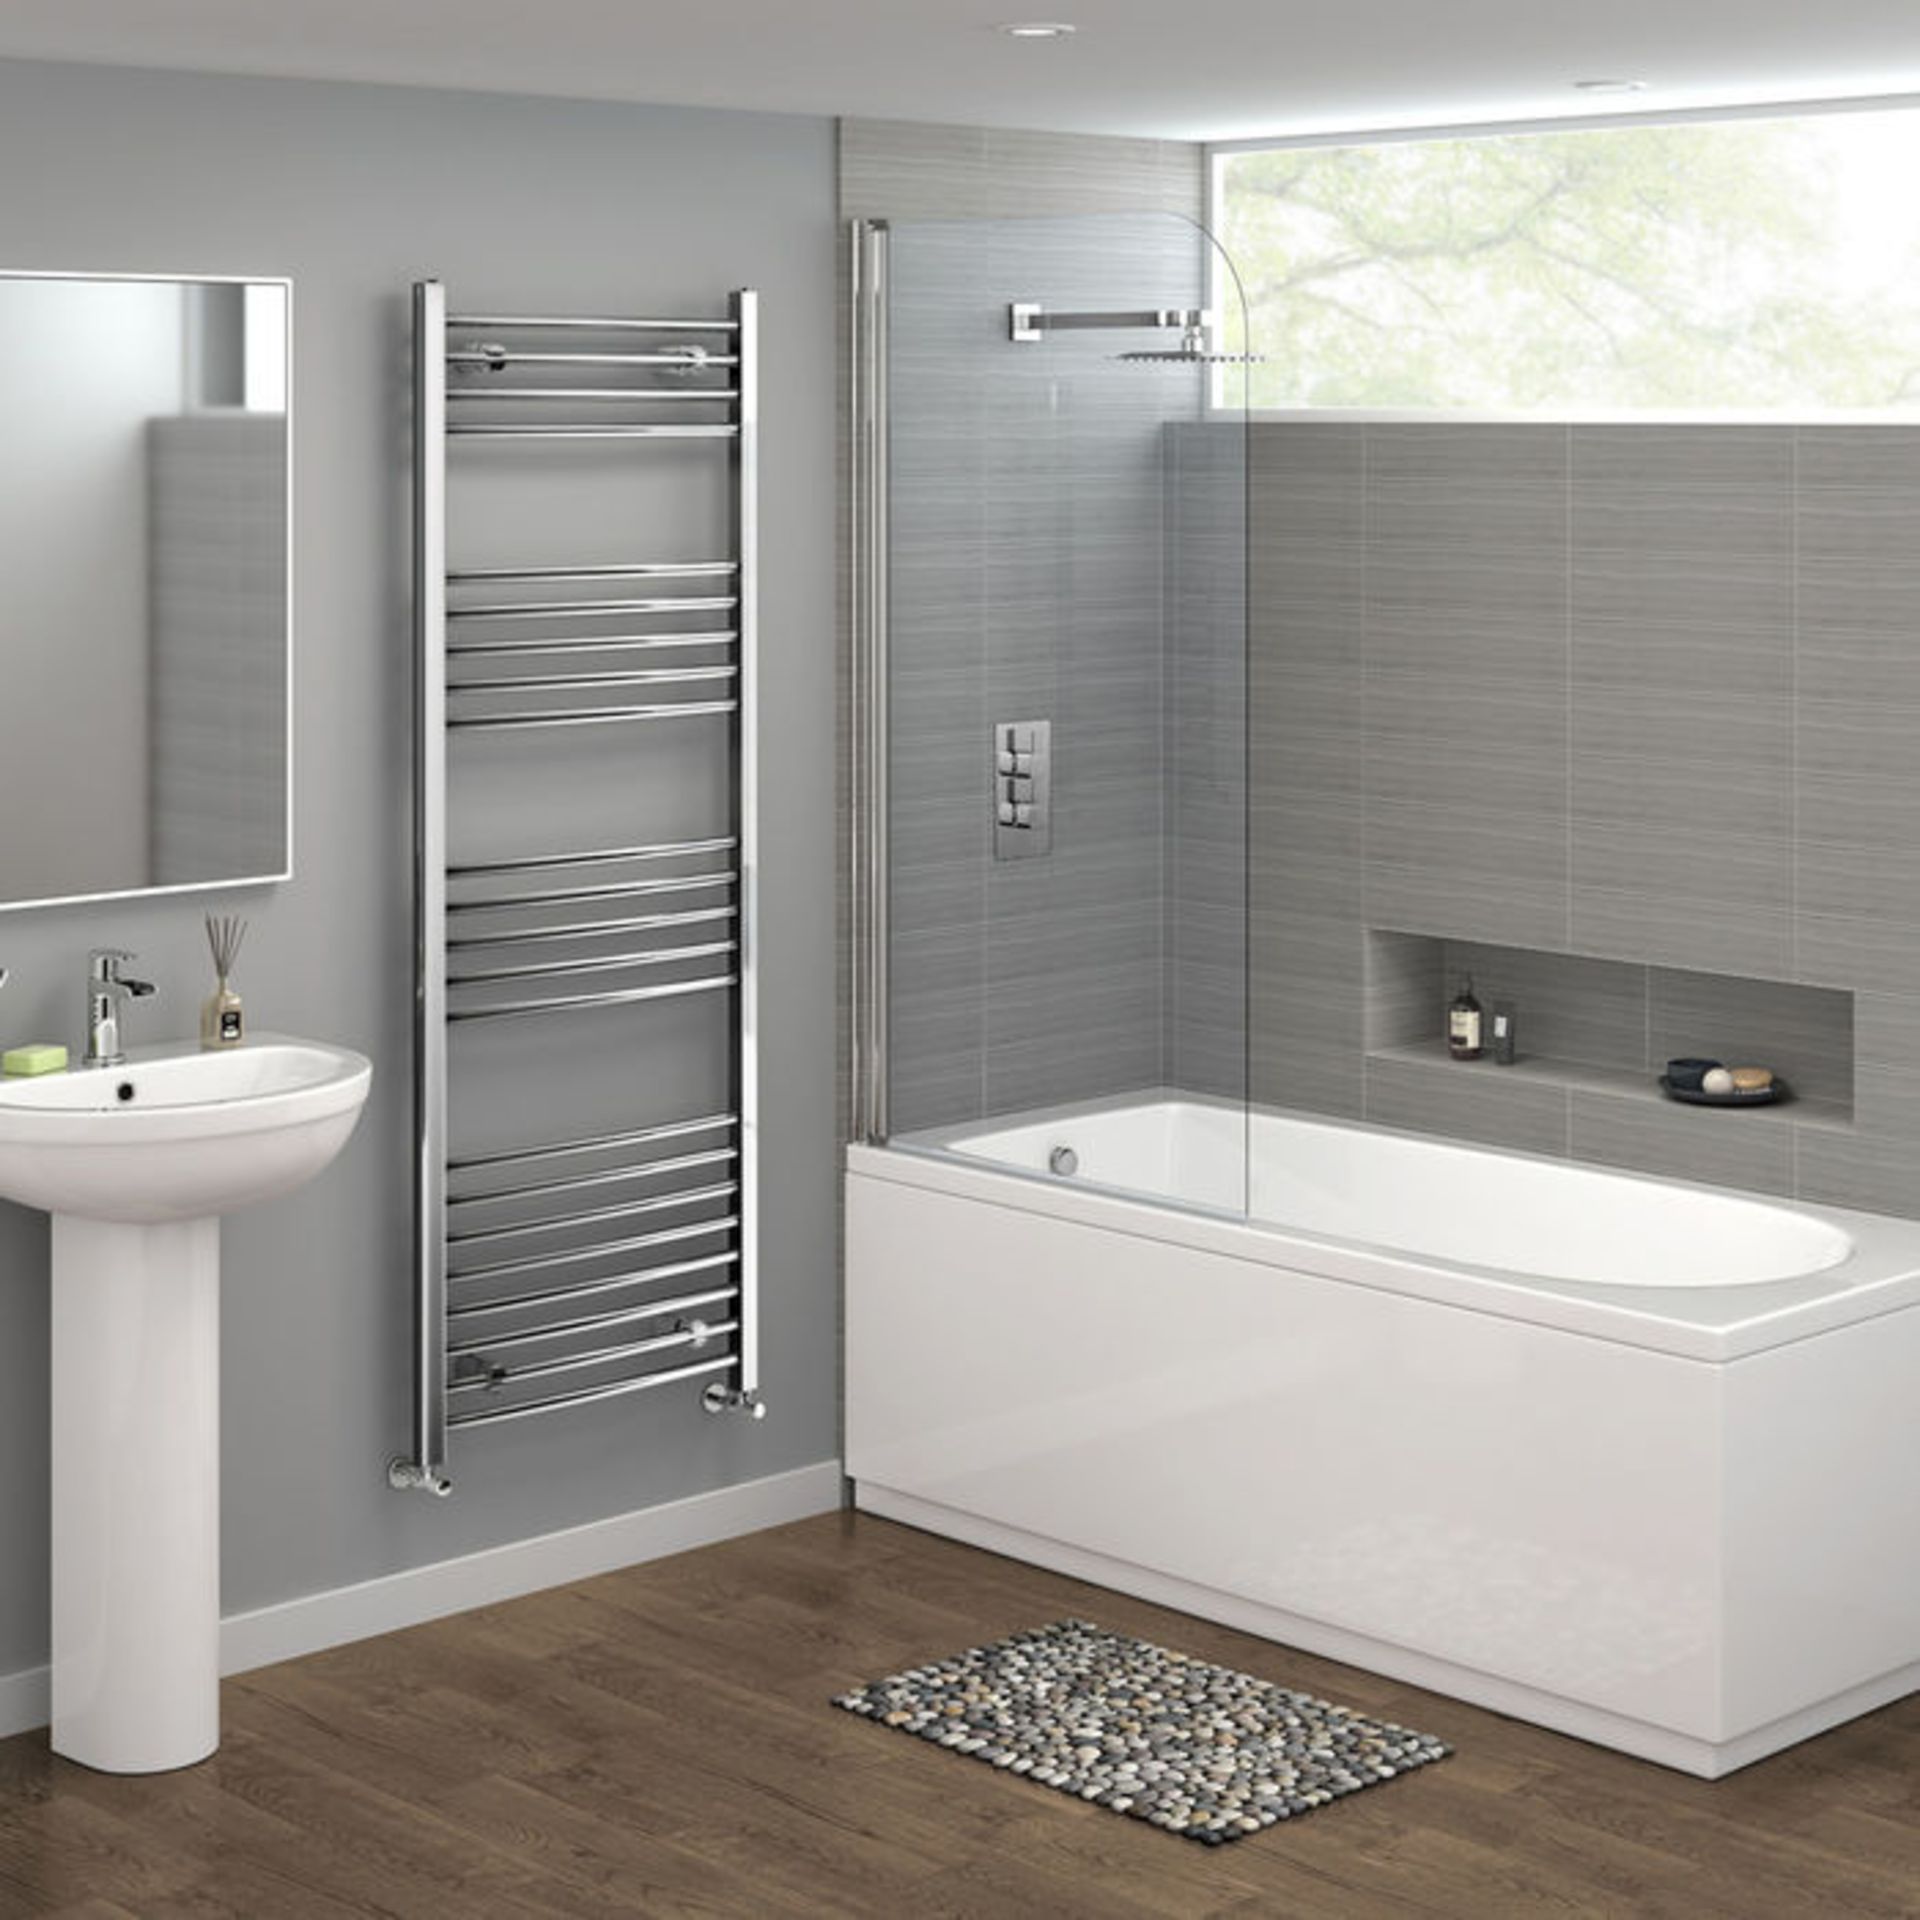 (H151) 1600x600mm - 20mm Tubes - Chrome Curved Rail Ladder Towel Radiator. RRP £150.38. Low carbon - Image 2 of 3